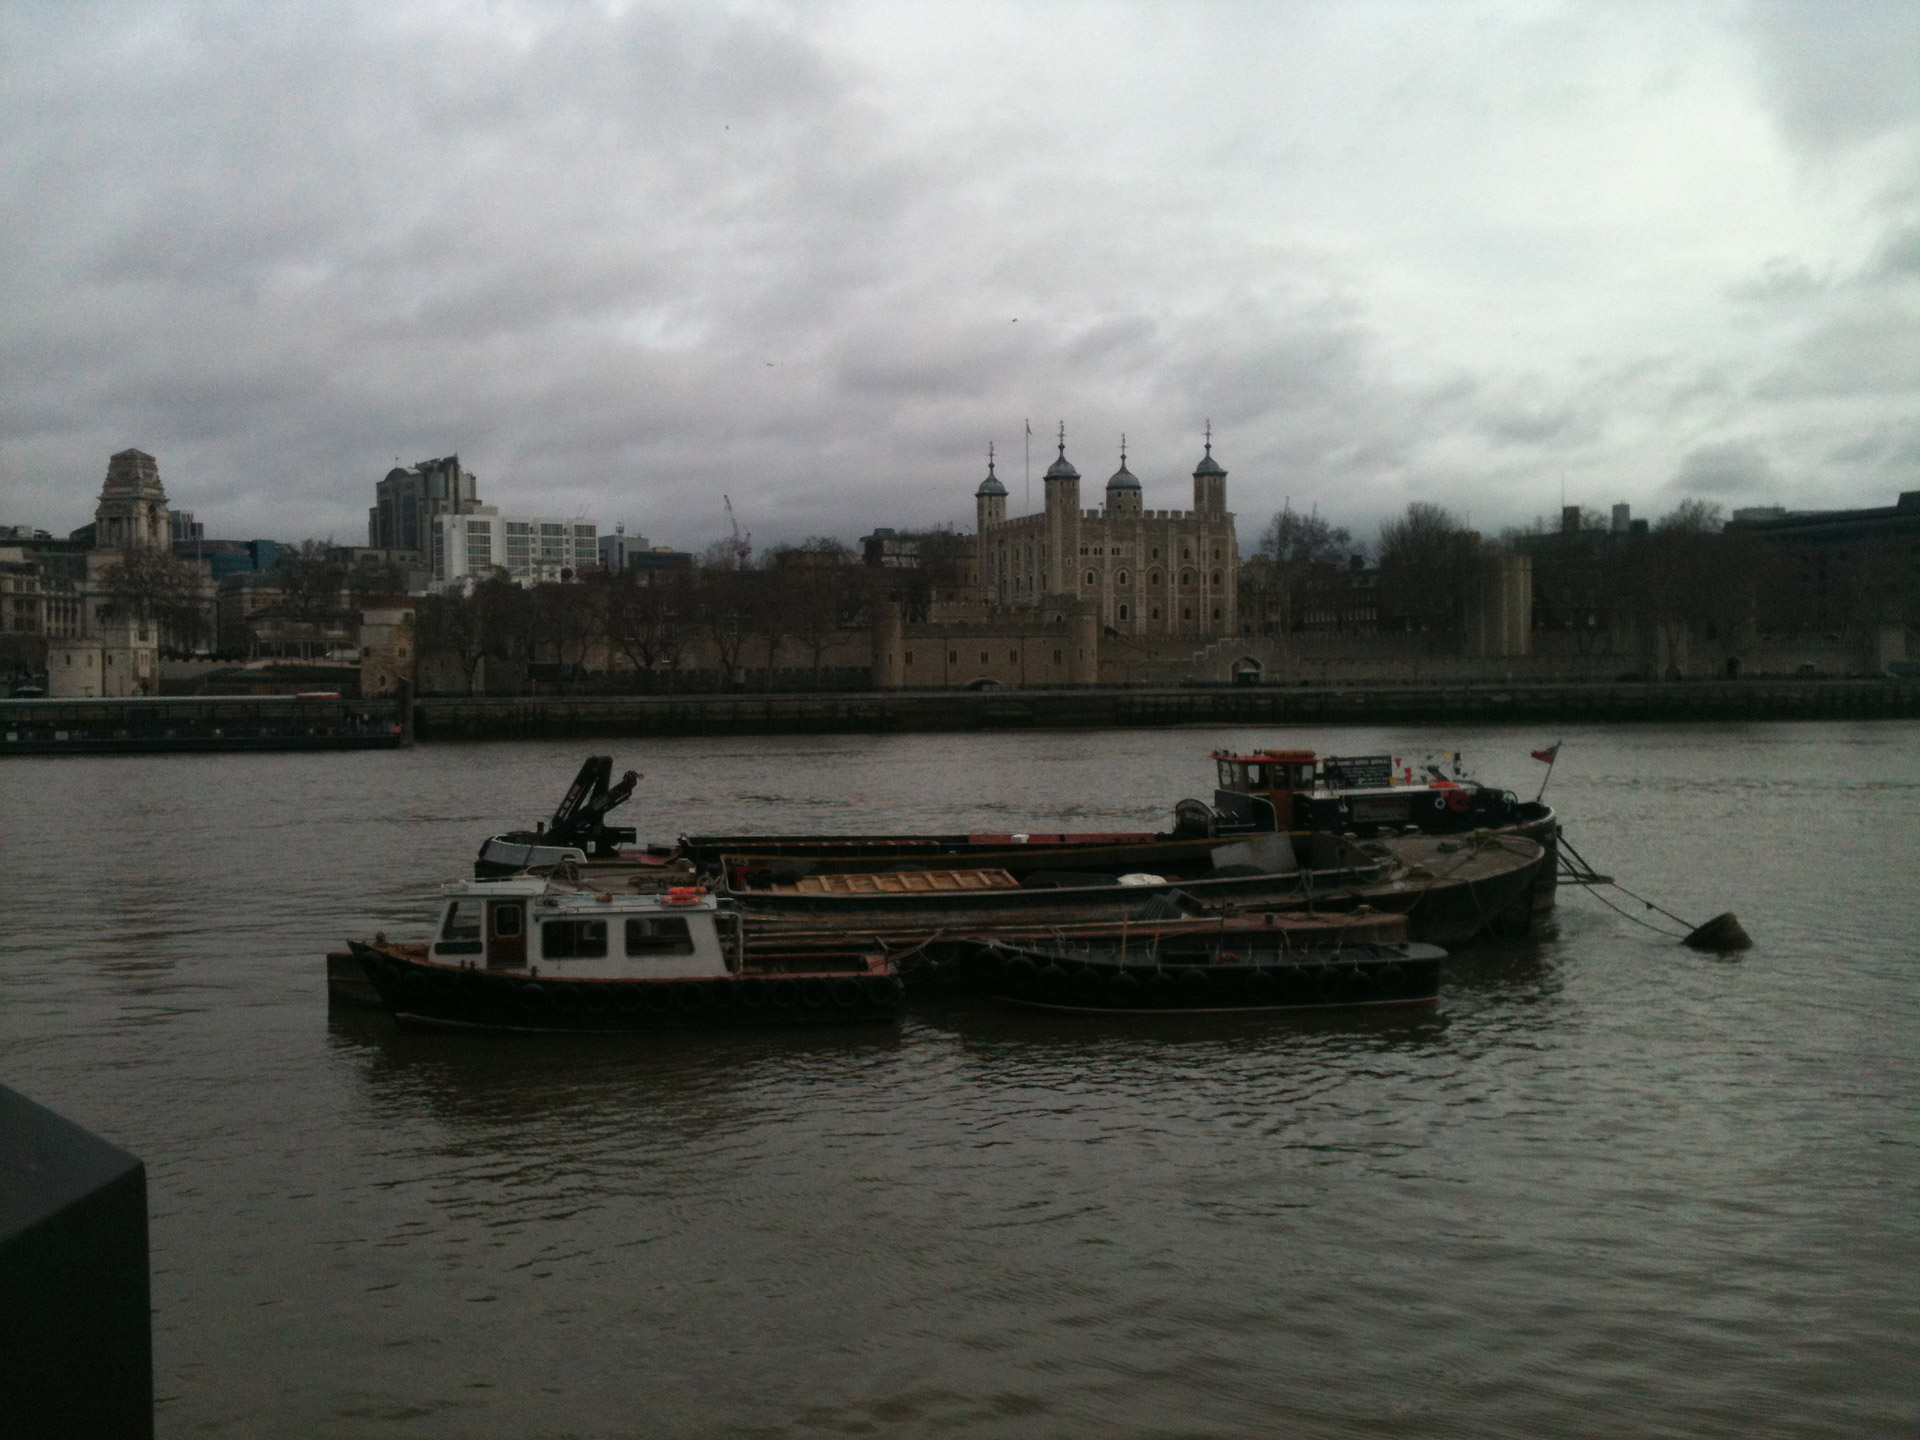 An old river barge on the thames in front of the Tower of London